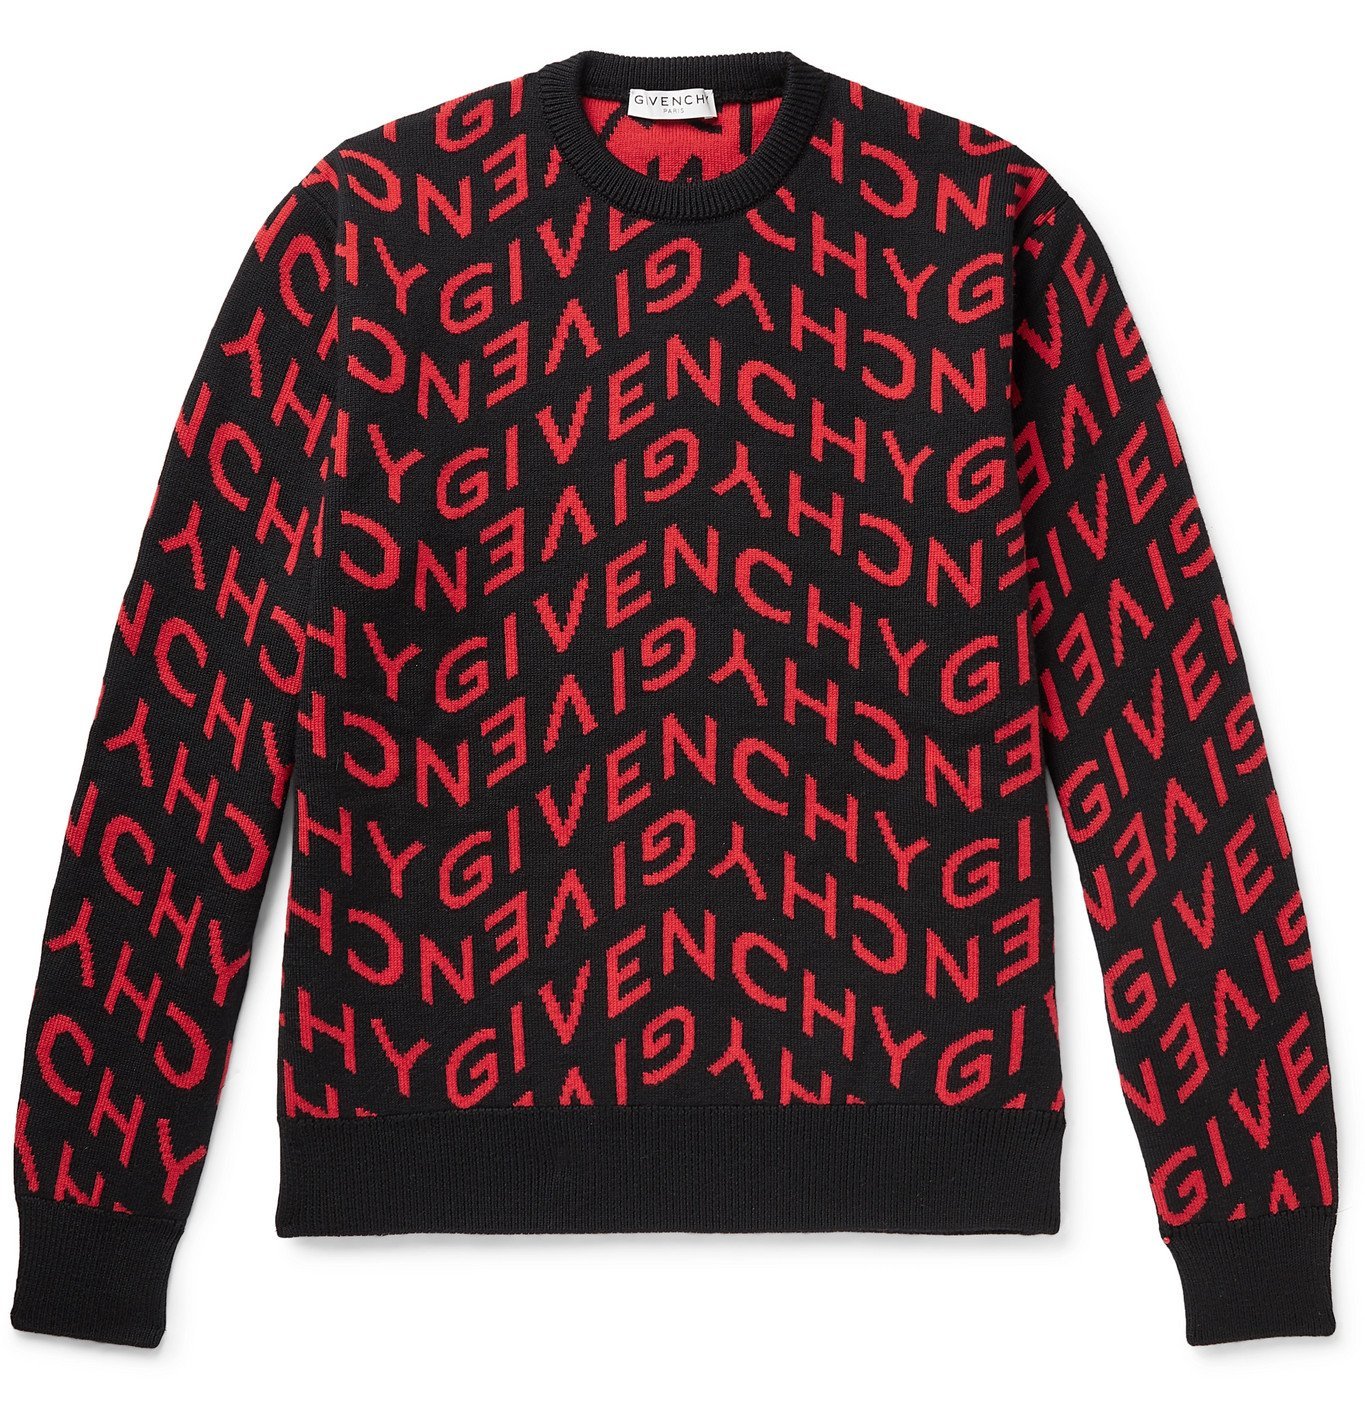 givenchy sweater red